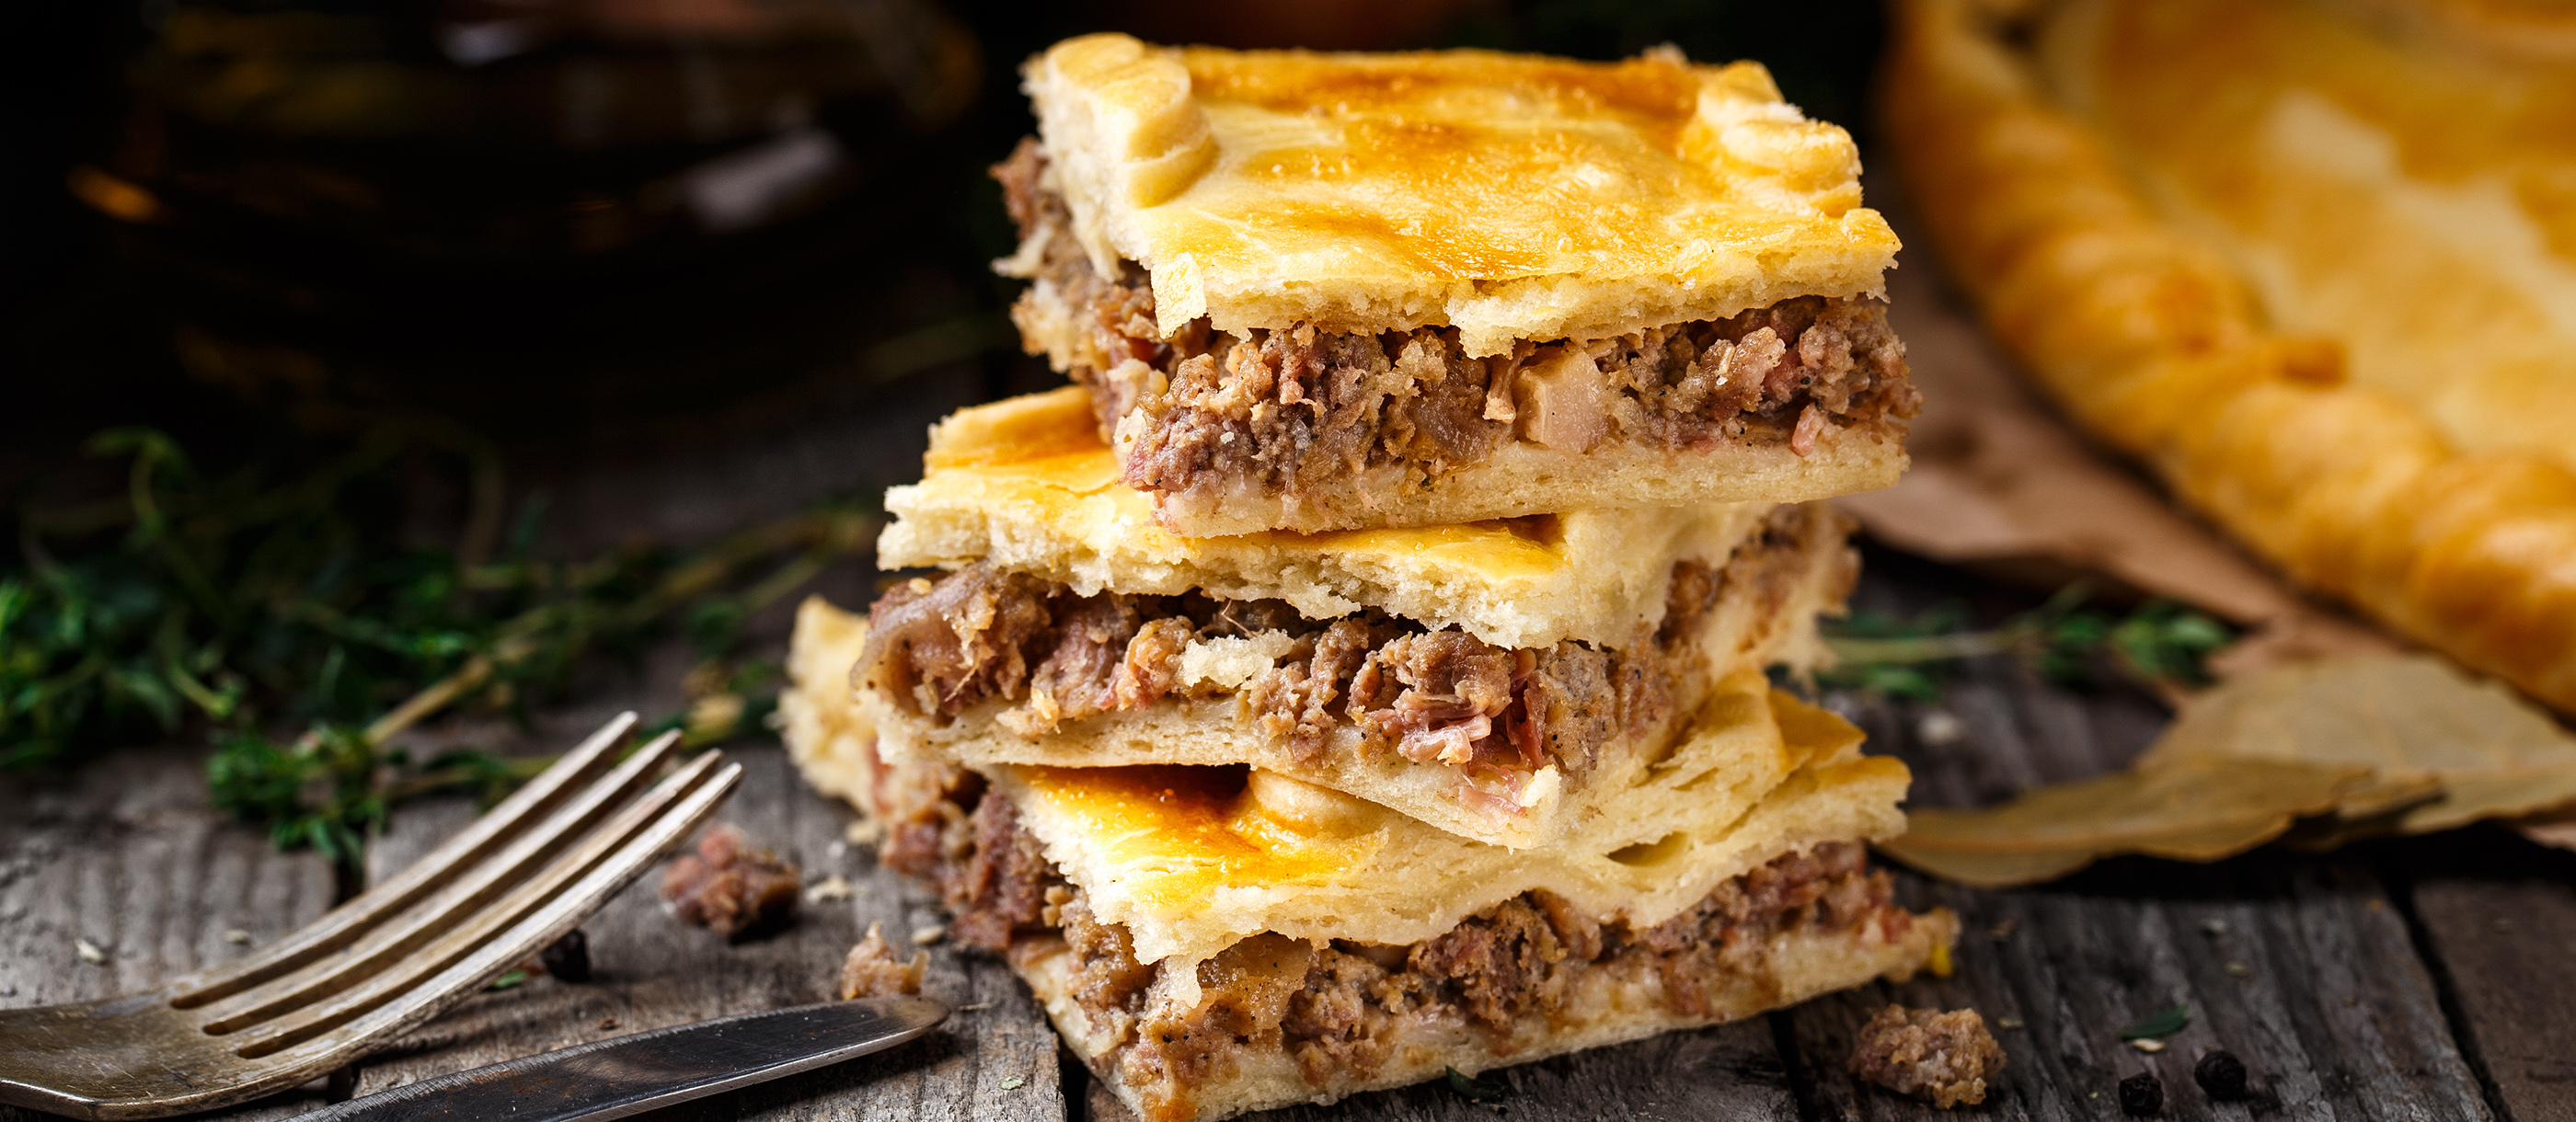 Pastel de Carne | Traditional Savory Pie From South America